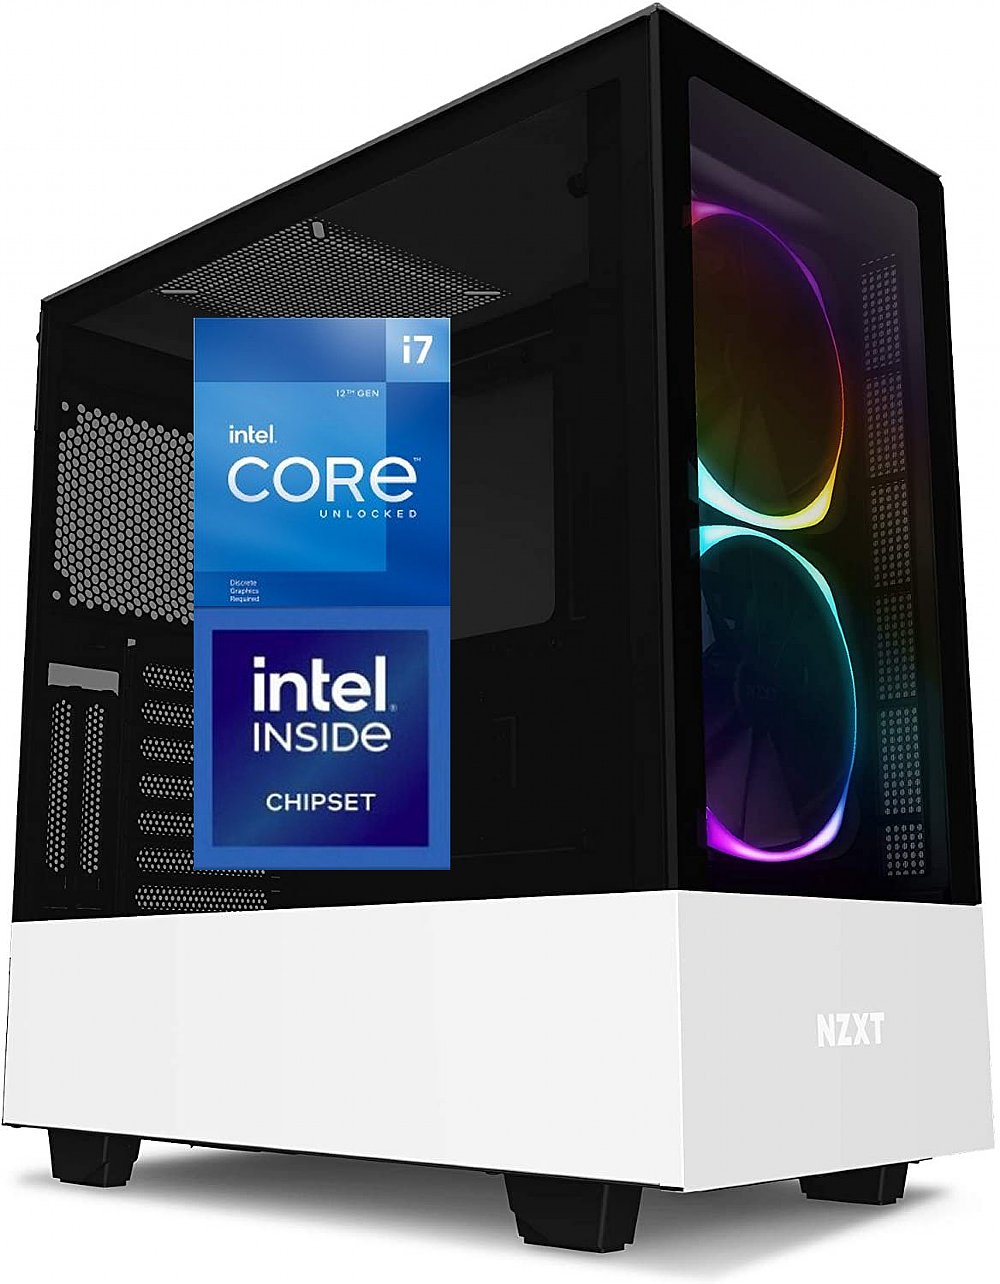 Afrikaanse zij is behuizing RTX 3070 Gaming PC with Intel i7 12700KF 12 Core, 1 TB SSD, DDR5